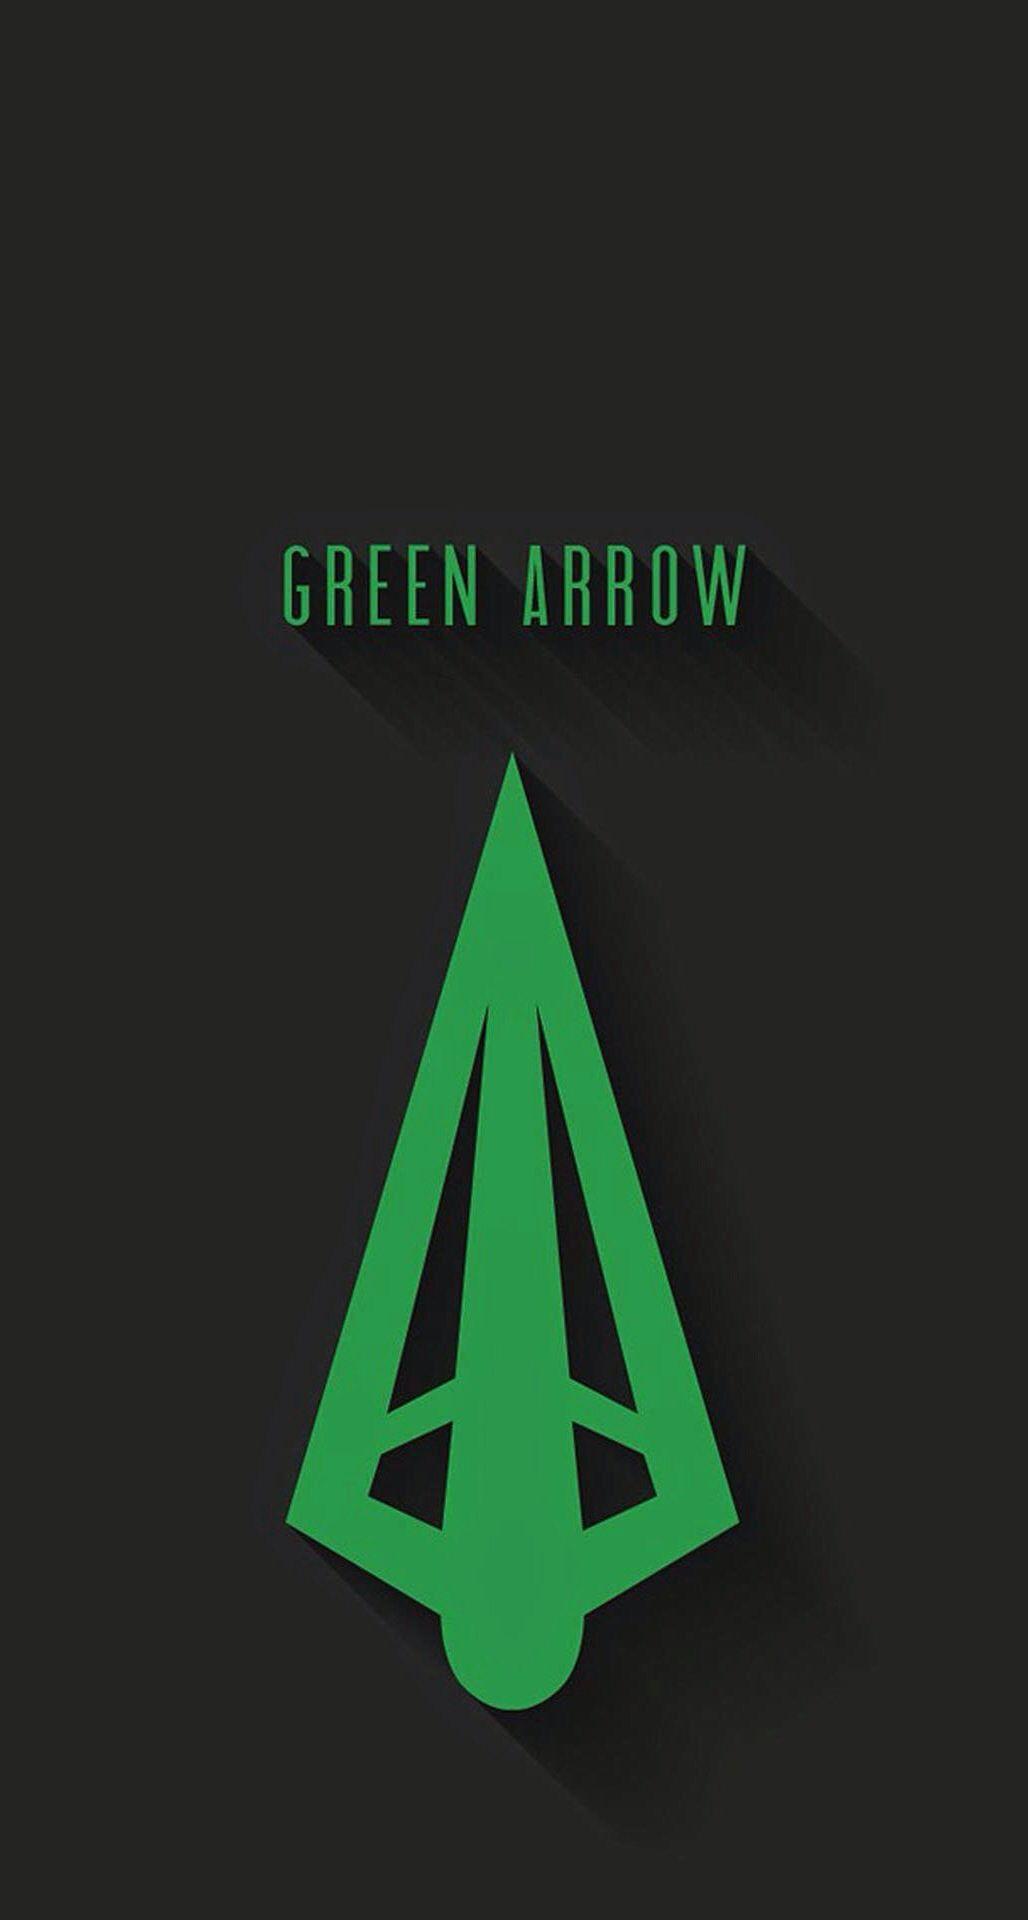 Green Arrow icon (Would make a cool Tattoo!). It's not easy being